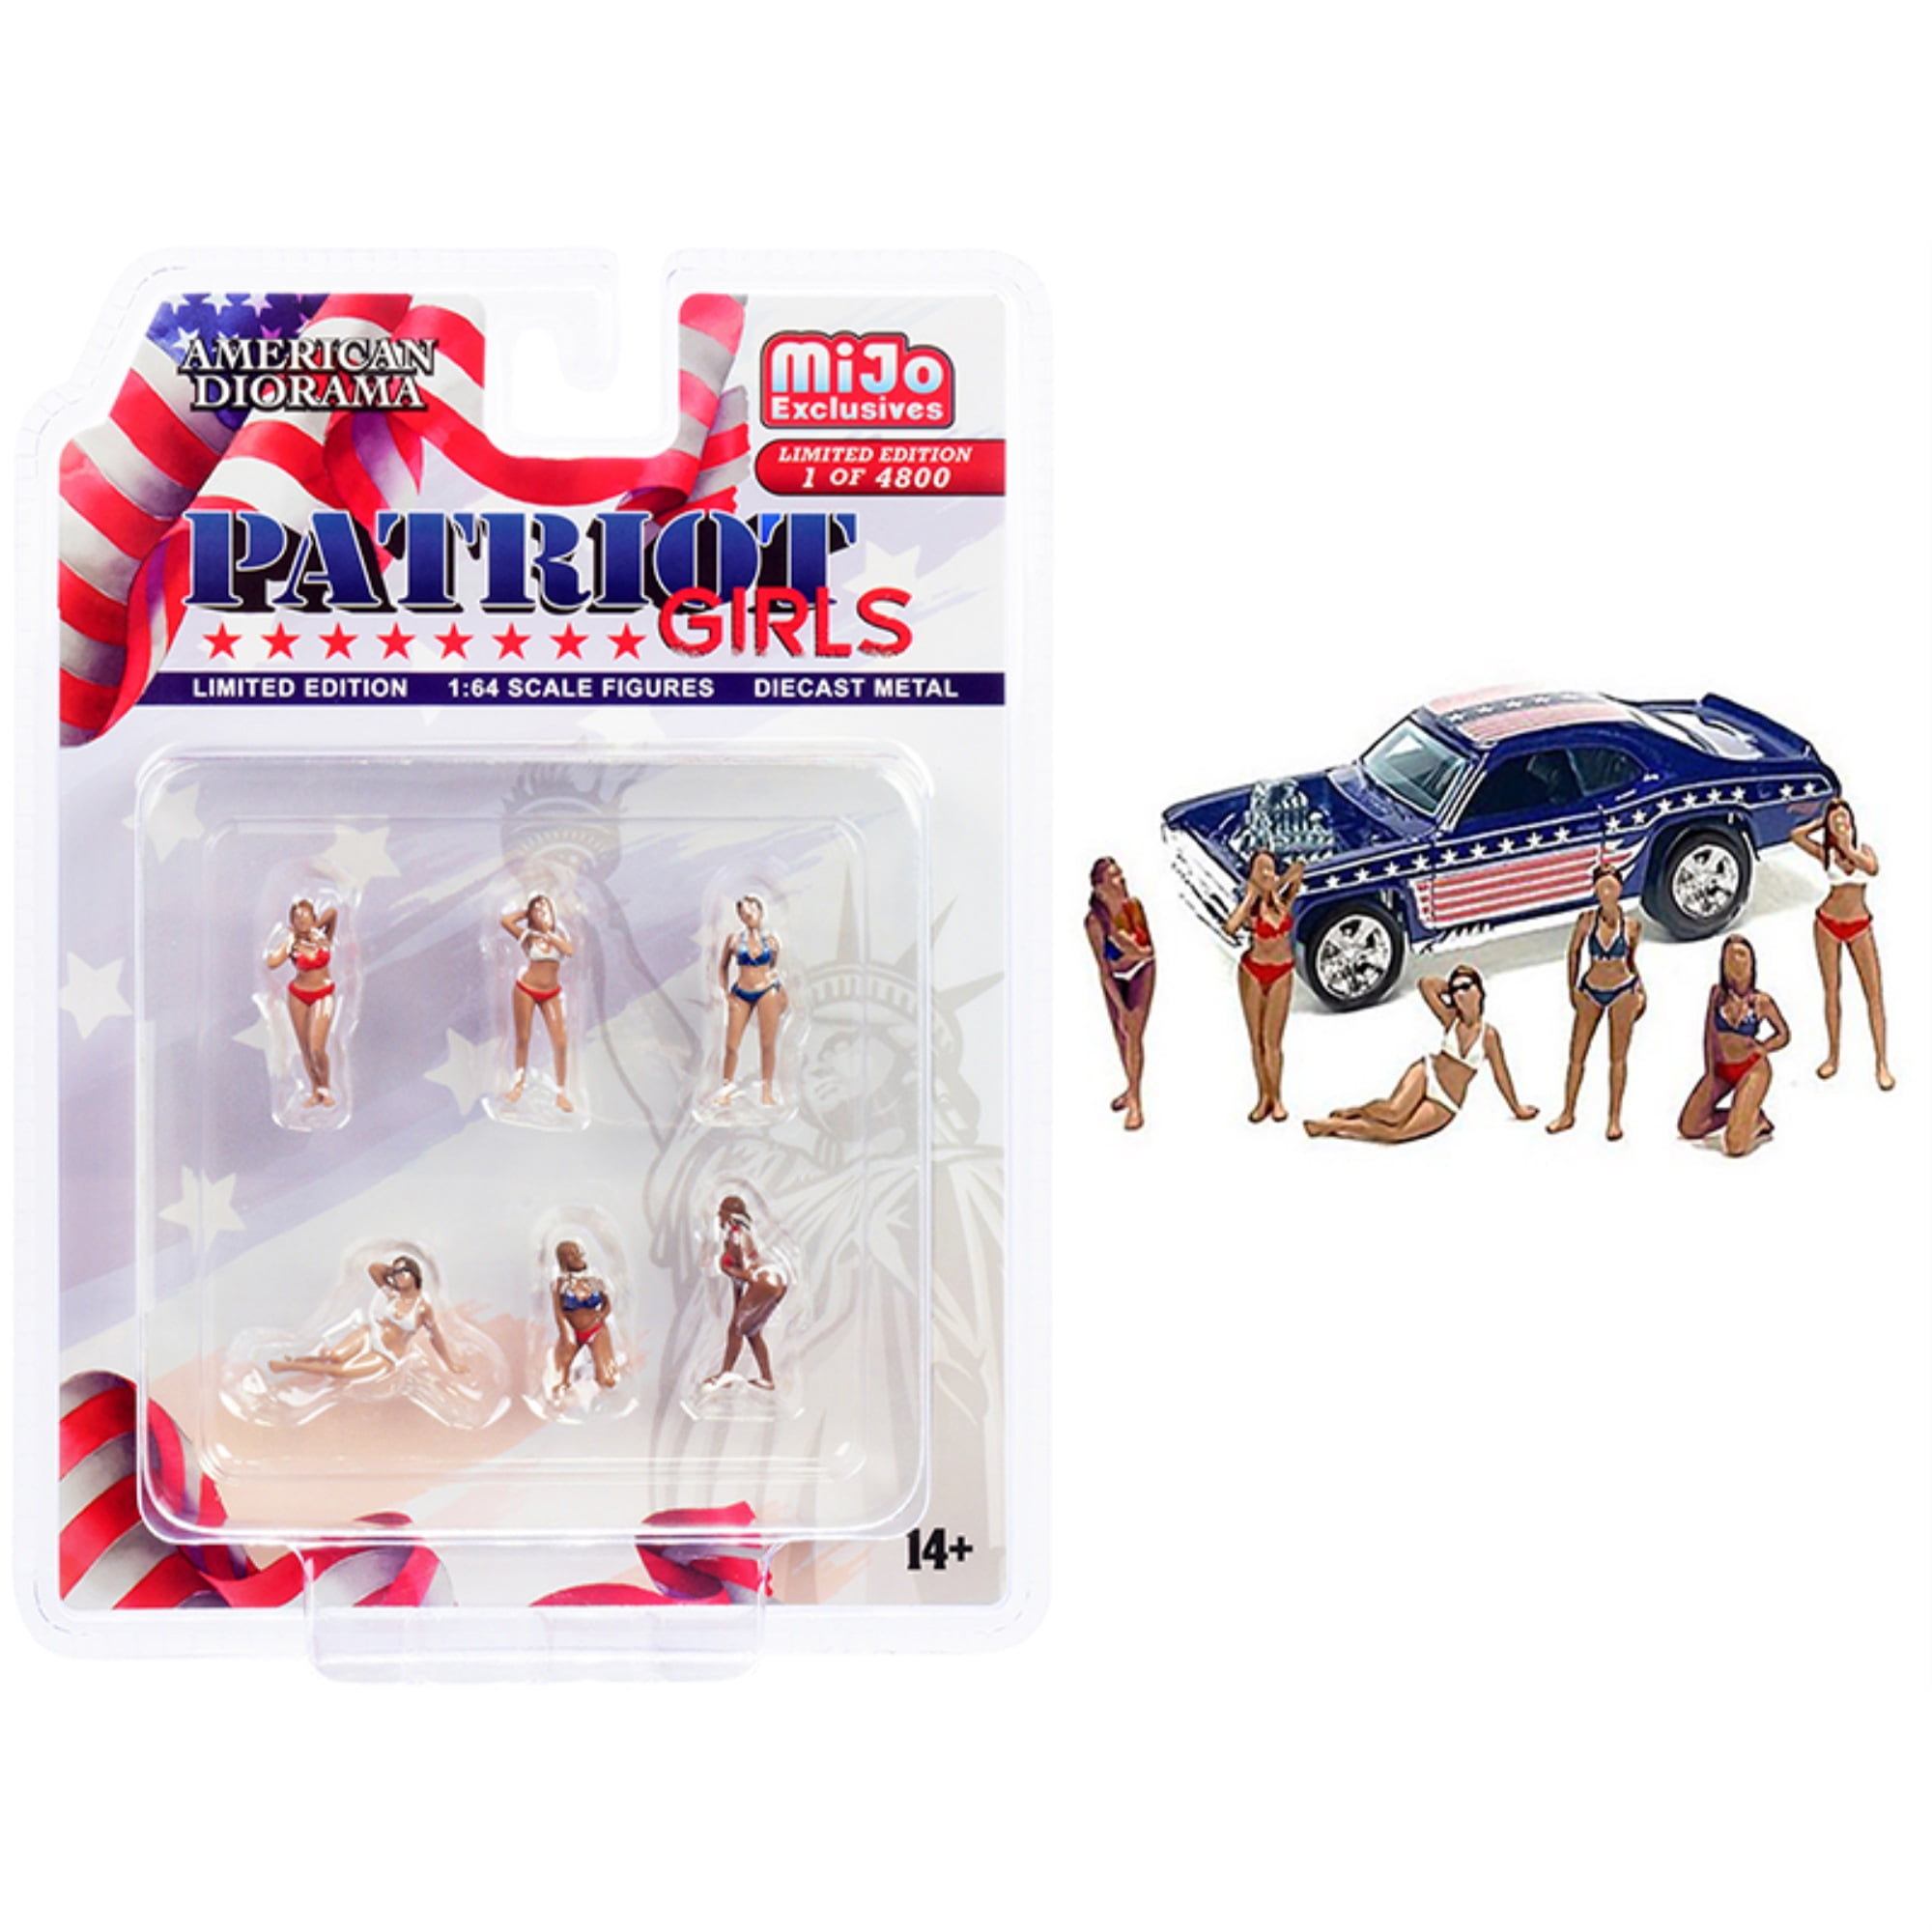 Picture of American Diorama 76498 0.5 x 1 in. 1-64 Scale Diecast Patriot Girls Diecast Figurines Set Limited Edition to Worldwide Model Car, 6 Piece - 4800 Piece